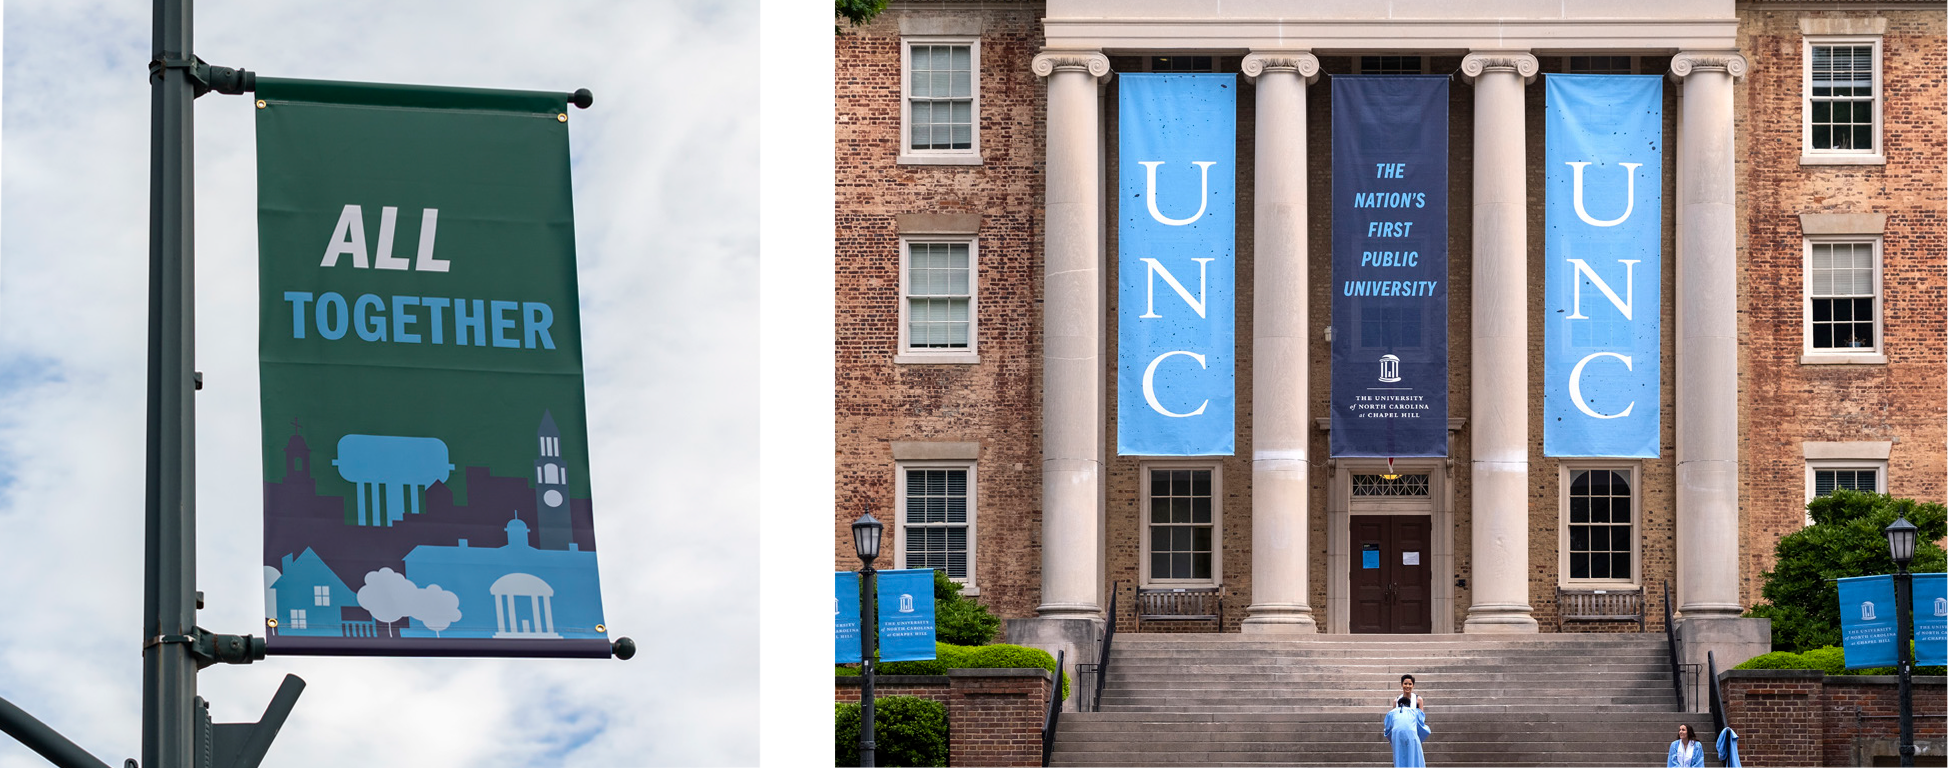 Examples of designs that show UNC brand elements. It includes a light pole banner and three building banners..